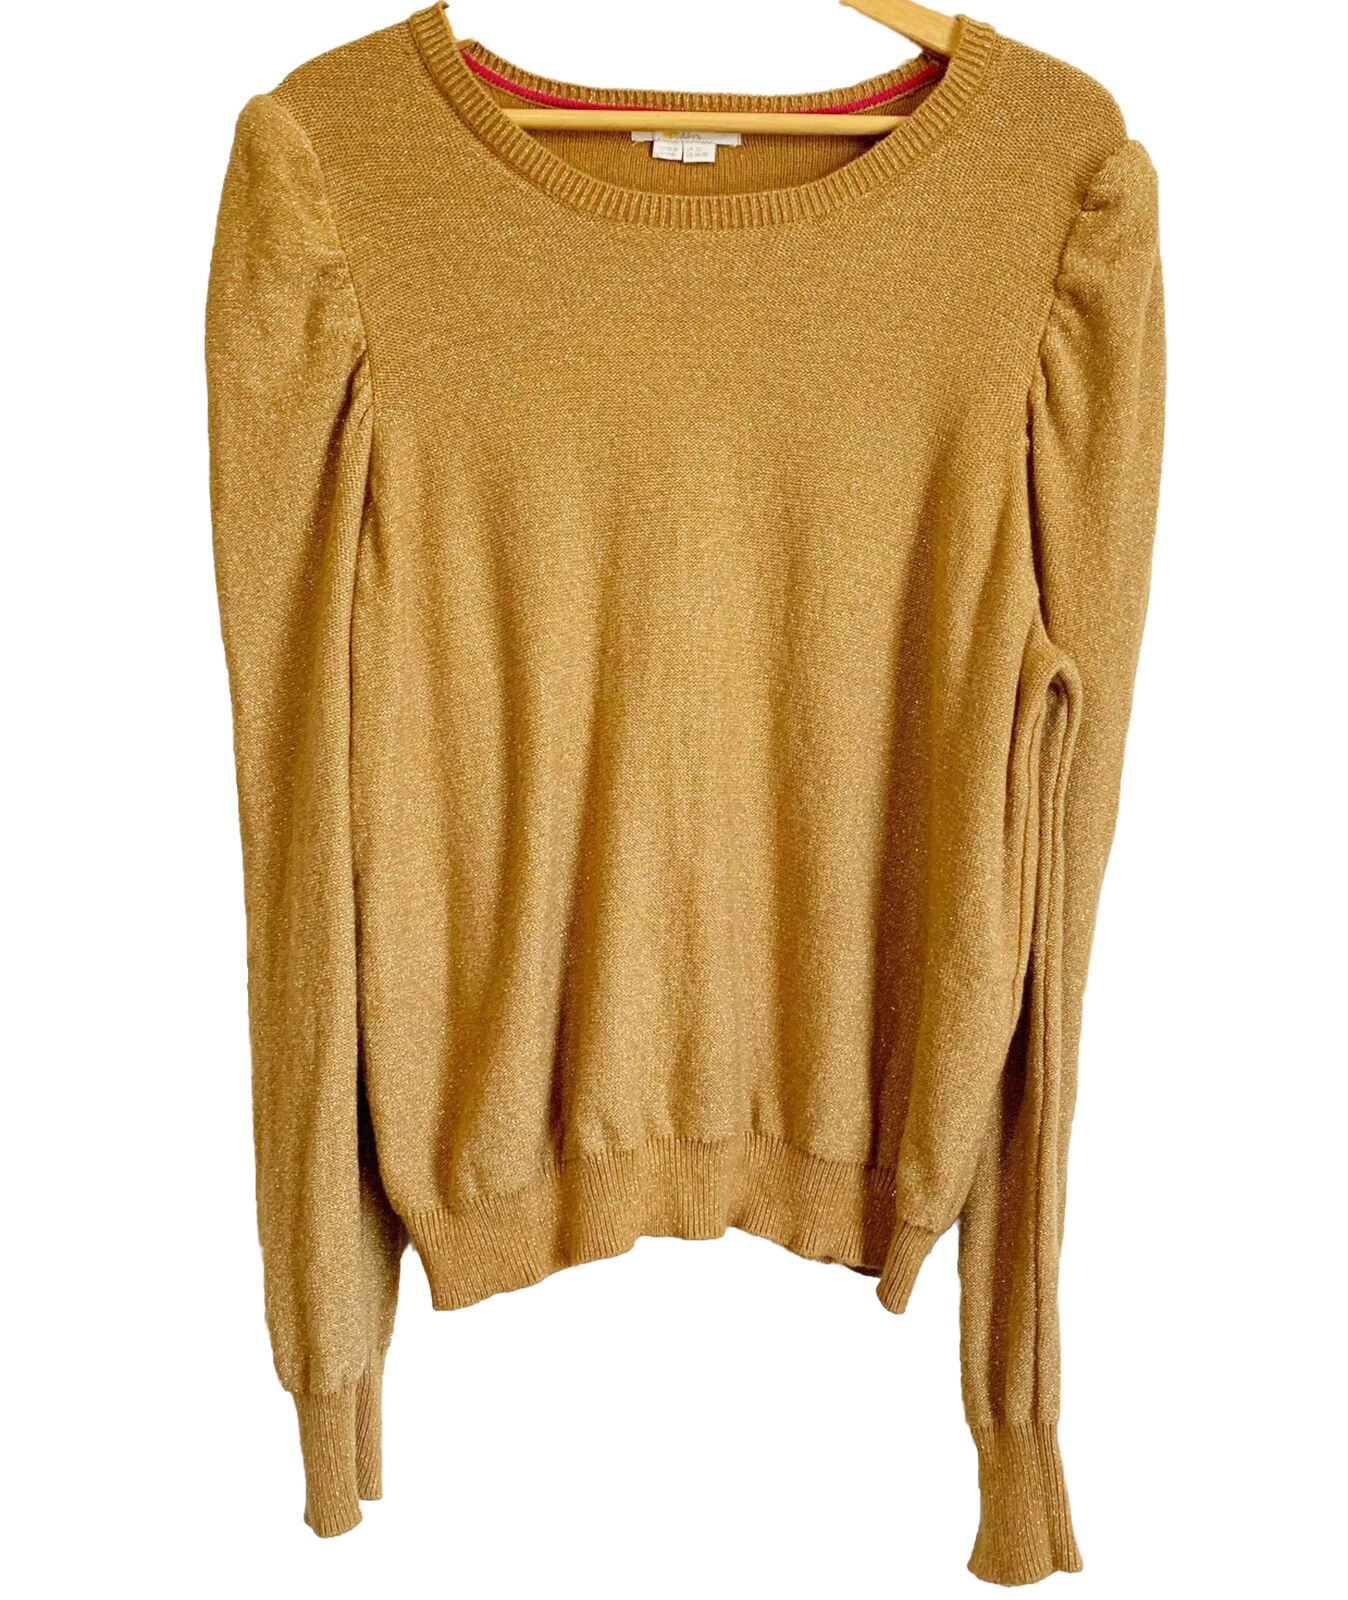 Boden Sparkle Puff Sleeve Sweater SZ 16 / 18 Tan … - image 1